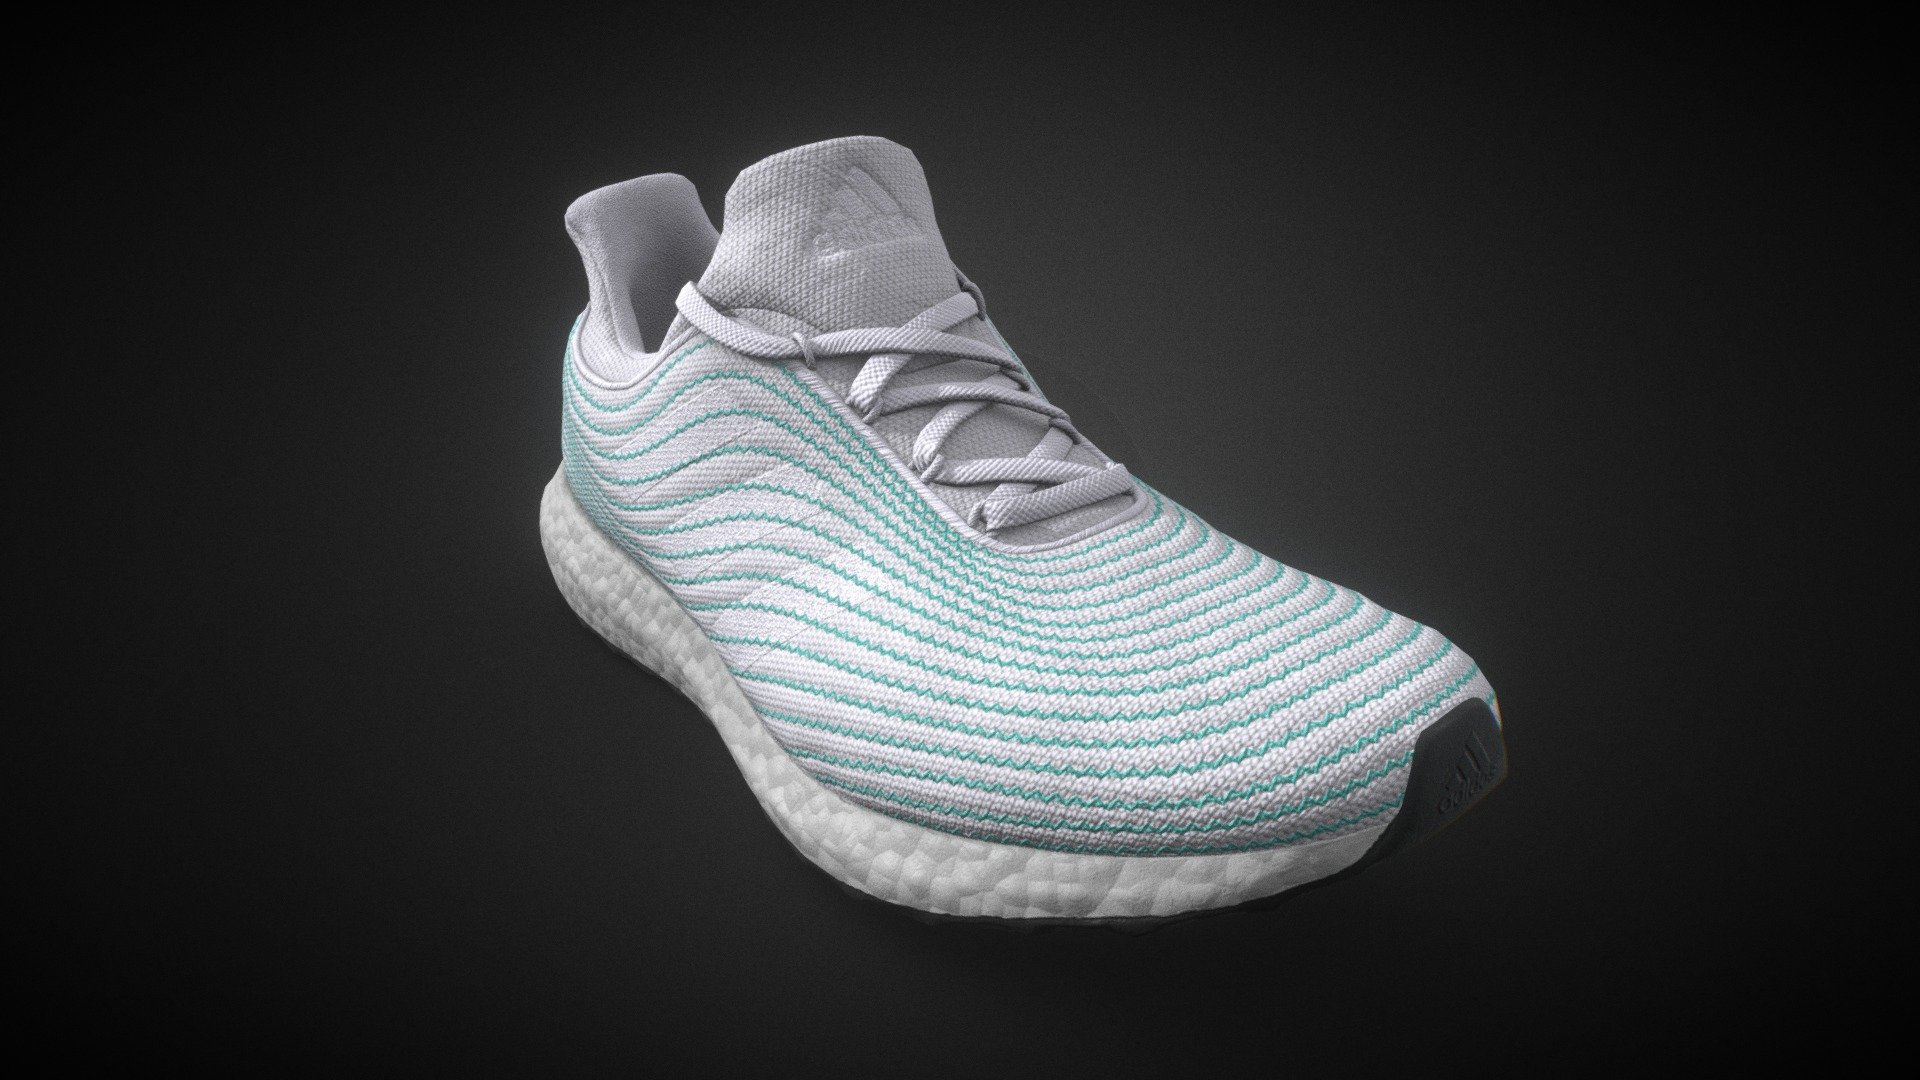 Low poly 3D model build mostly in Substance Painter - Adidas x Parley Ultraboost DNA - 3D model by IrimiaTiberiu 3d model